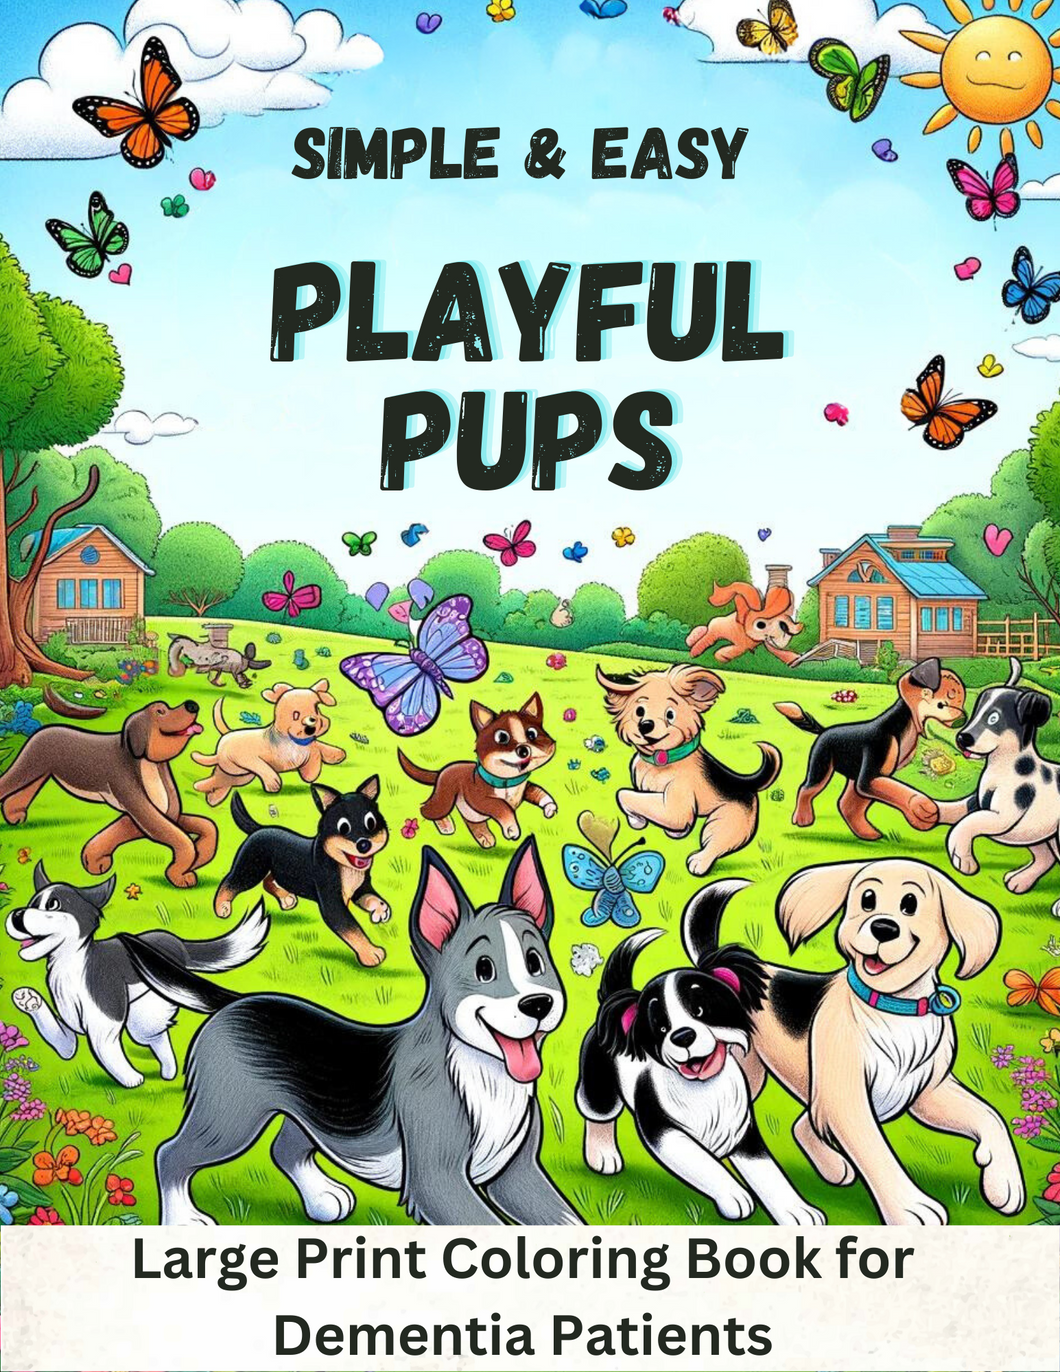 Playful Pups:  Simple & Easy Large Print Coloring Book for Dementia Patients